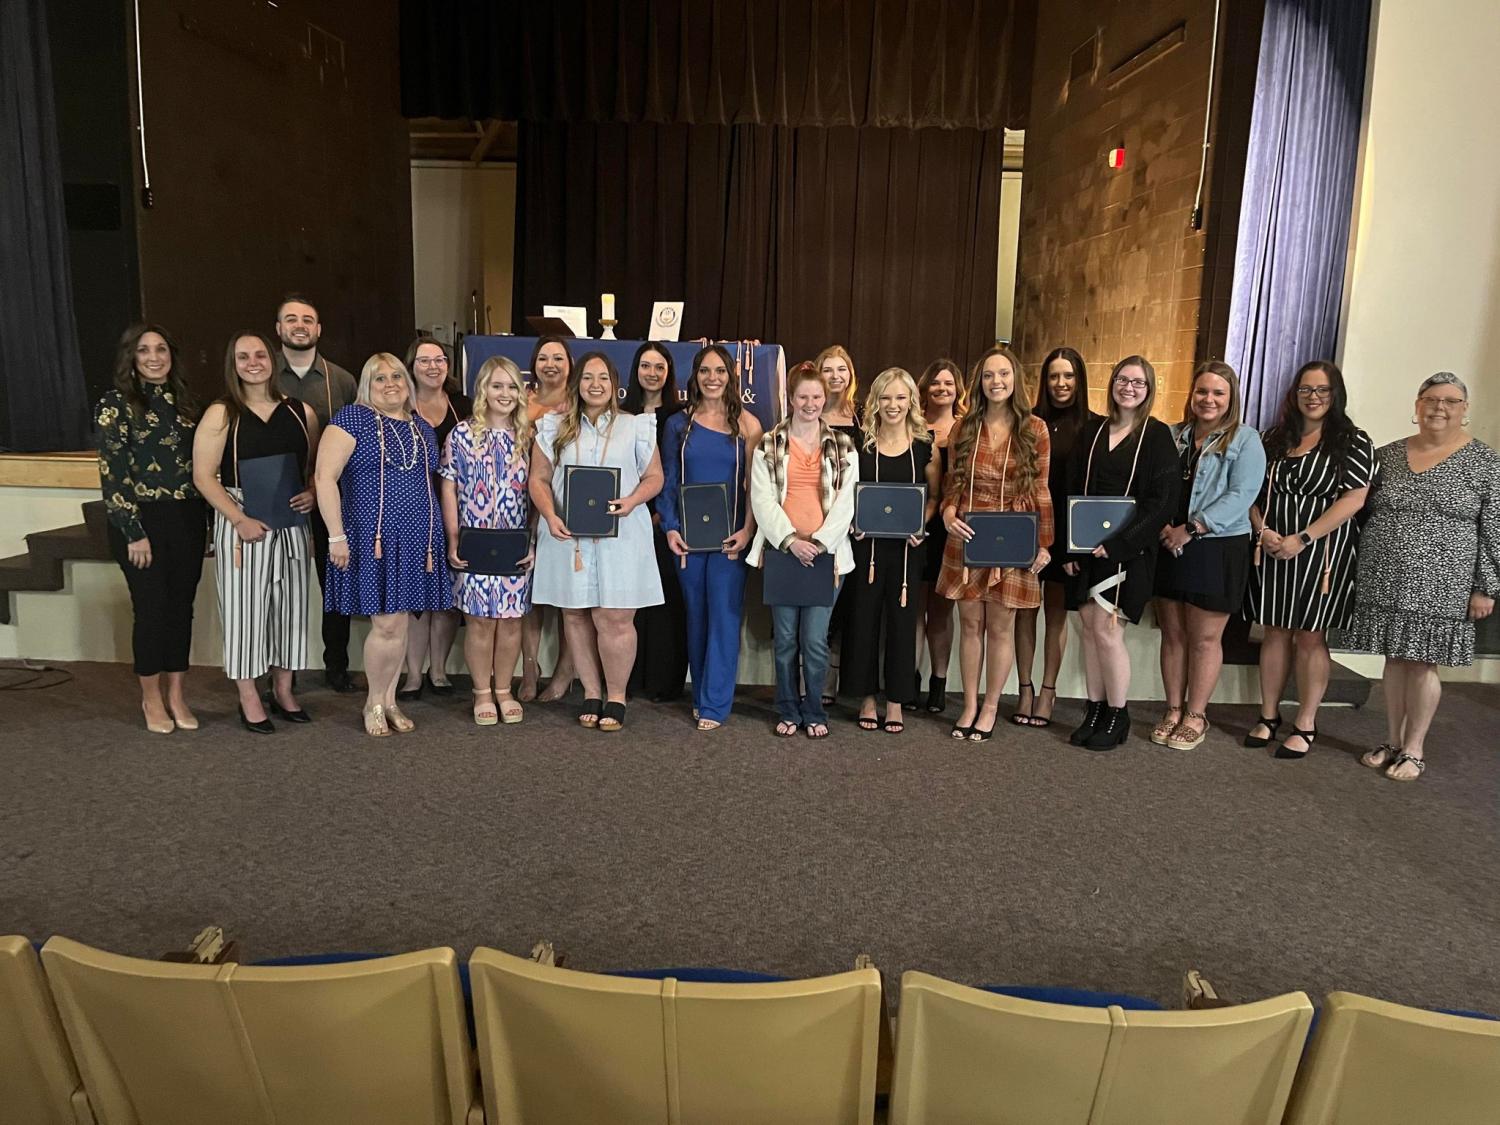 Alpha Delta Nu National Honor Society Chapter has been established at Bluefield State University.  The Honor Society recognizes the academic excellence of students in the study of Associate Degree Nursing.